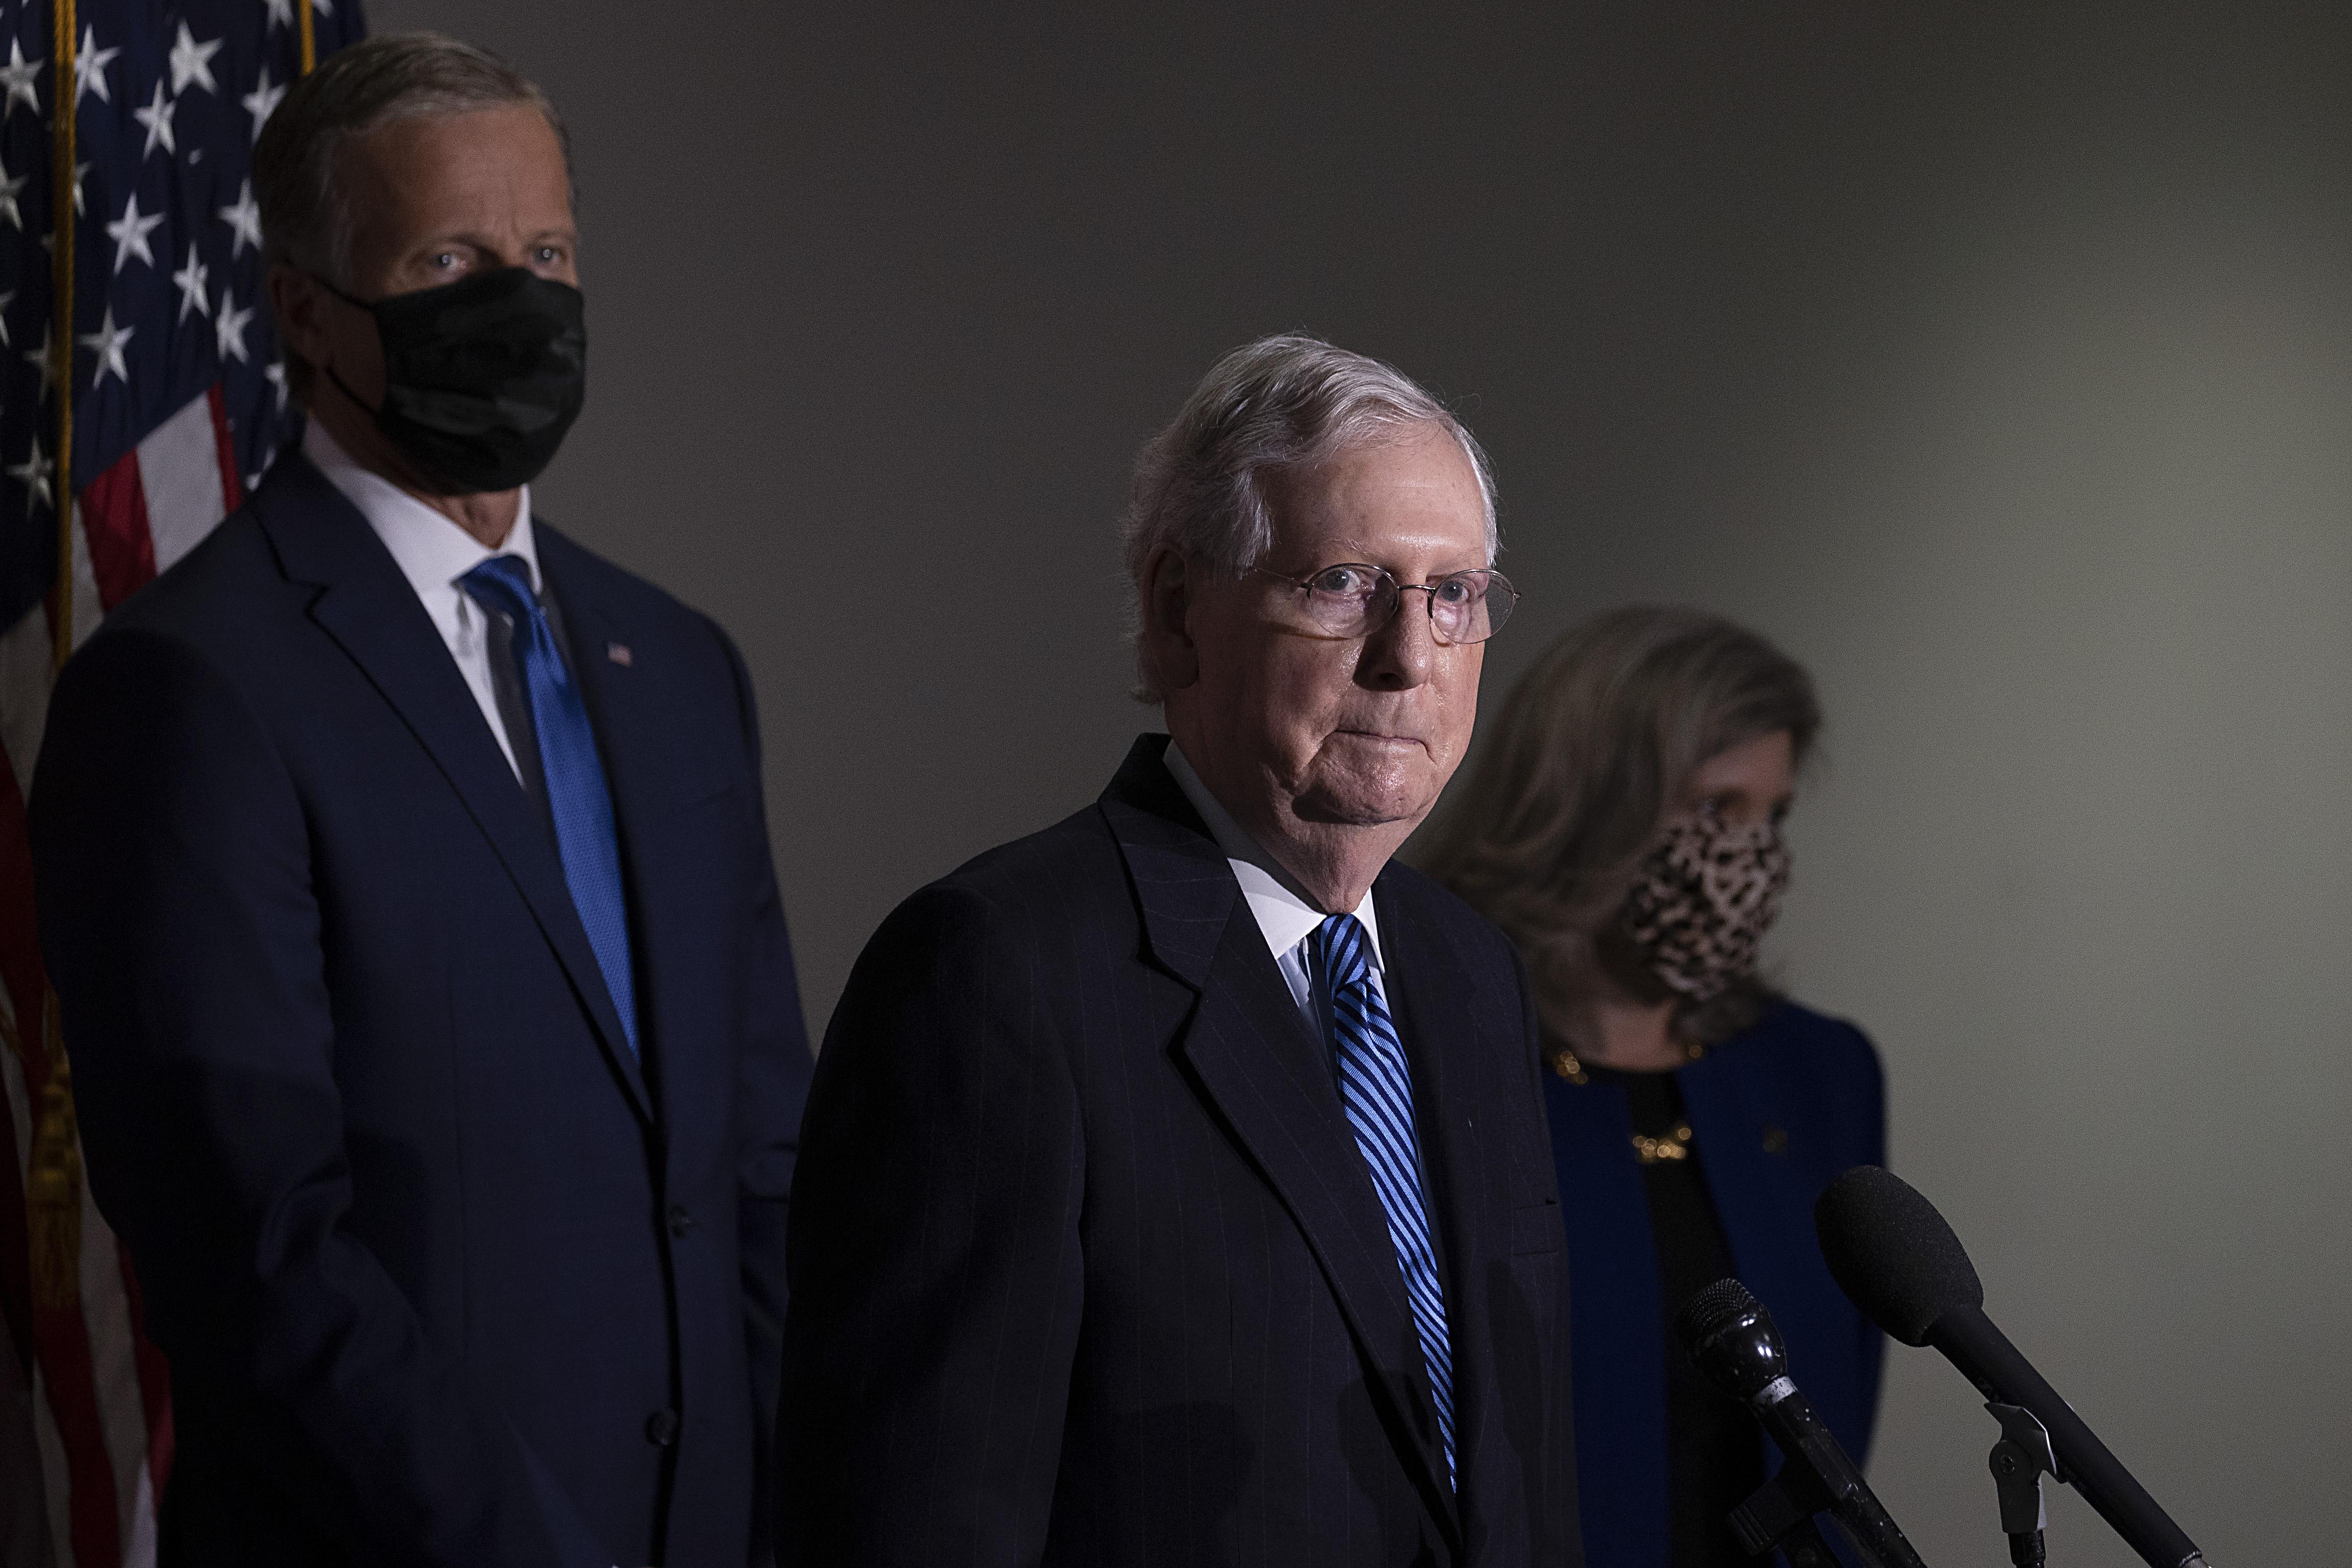 Mitch McConnell speaks at a mic with two people flanking him